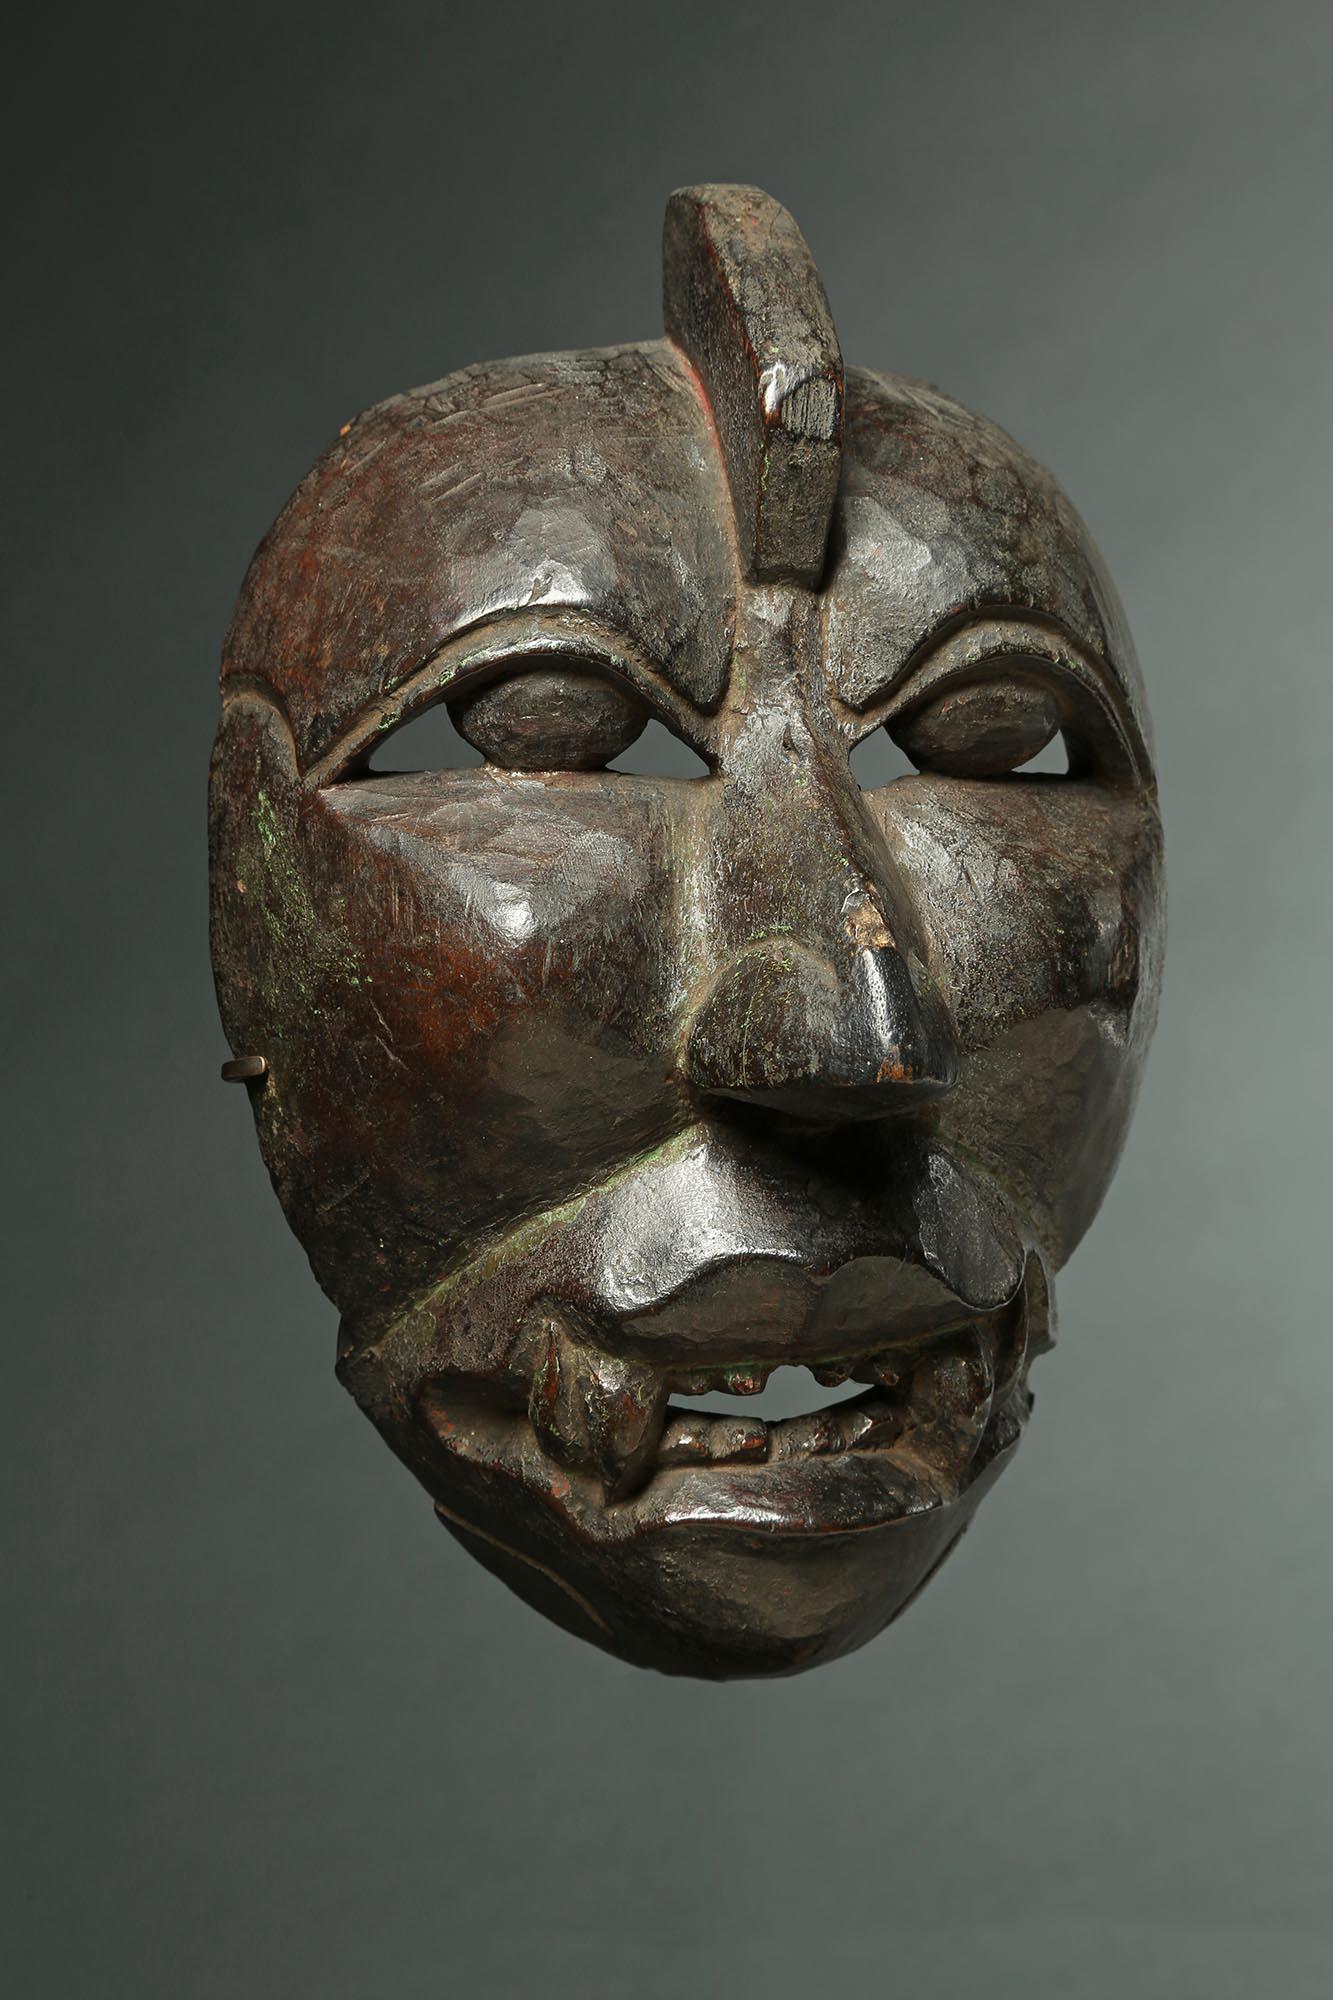 A very scarce and very old mask, with open mouth, eyes and fangs. From the Dieng Plateau area, Central Java, Indonesia, 19th century, possibly 18th century. Wear to edges and very deep patina inside from extensive use in ceremonies and dances.